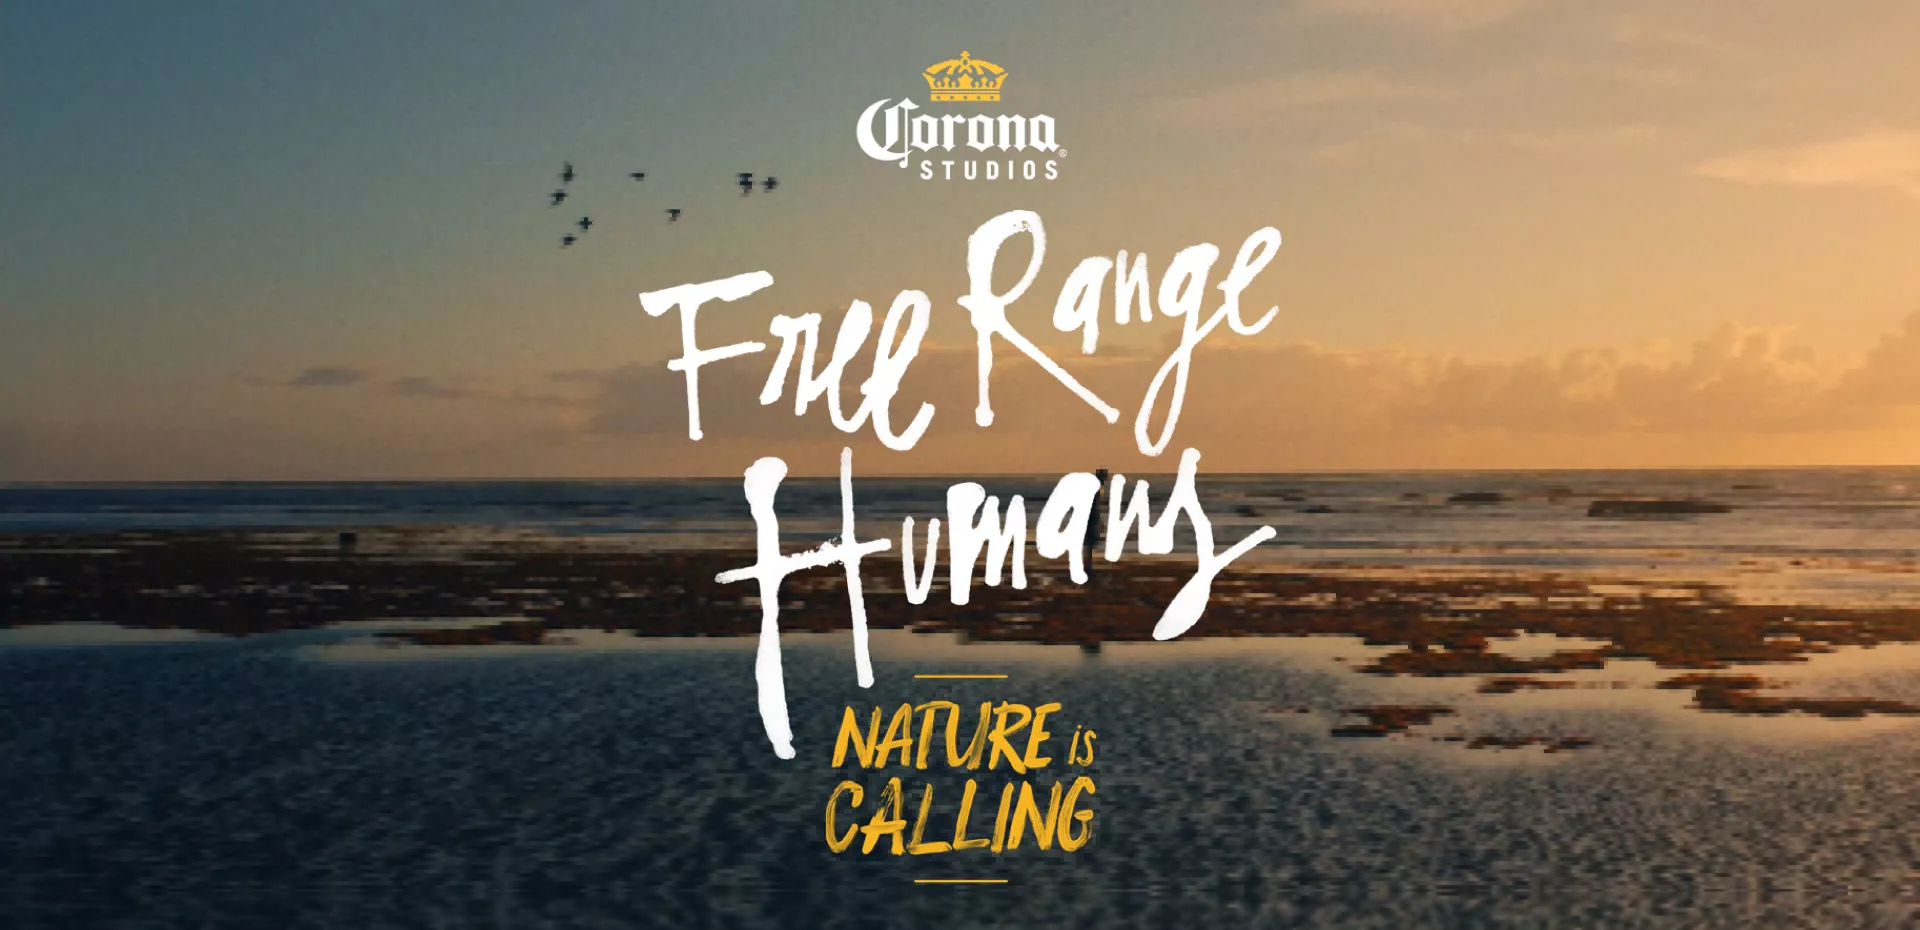 Free ranger humans - About